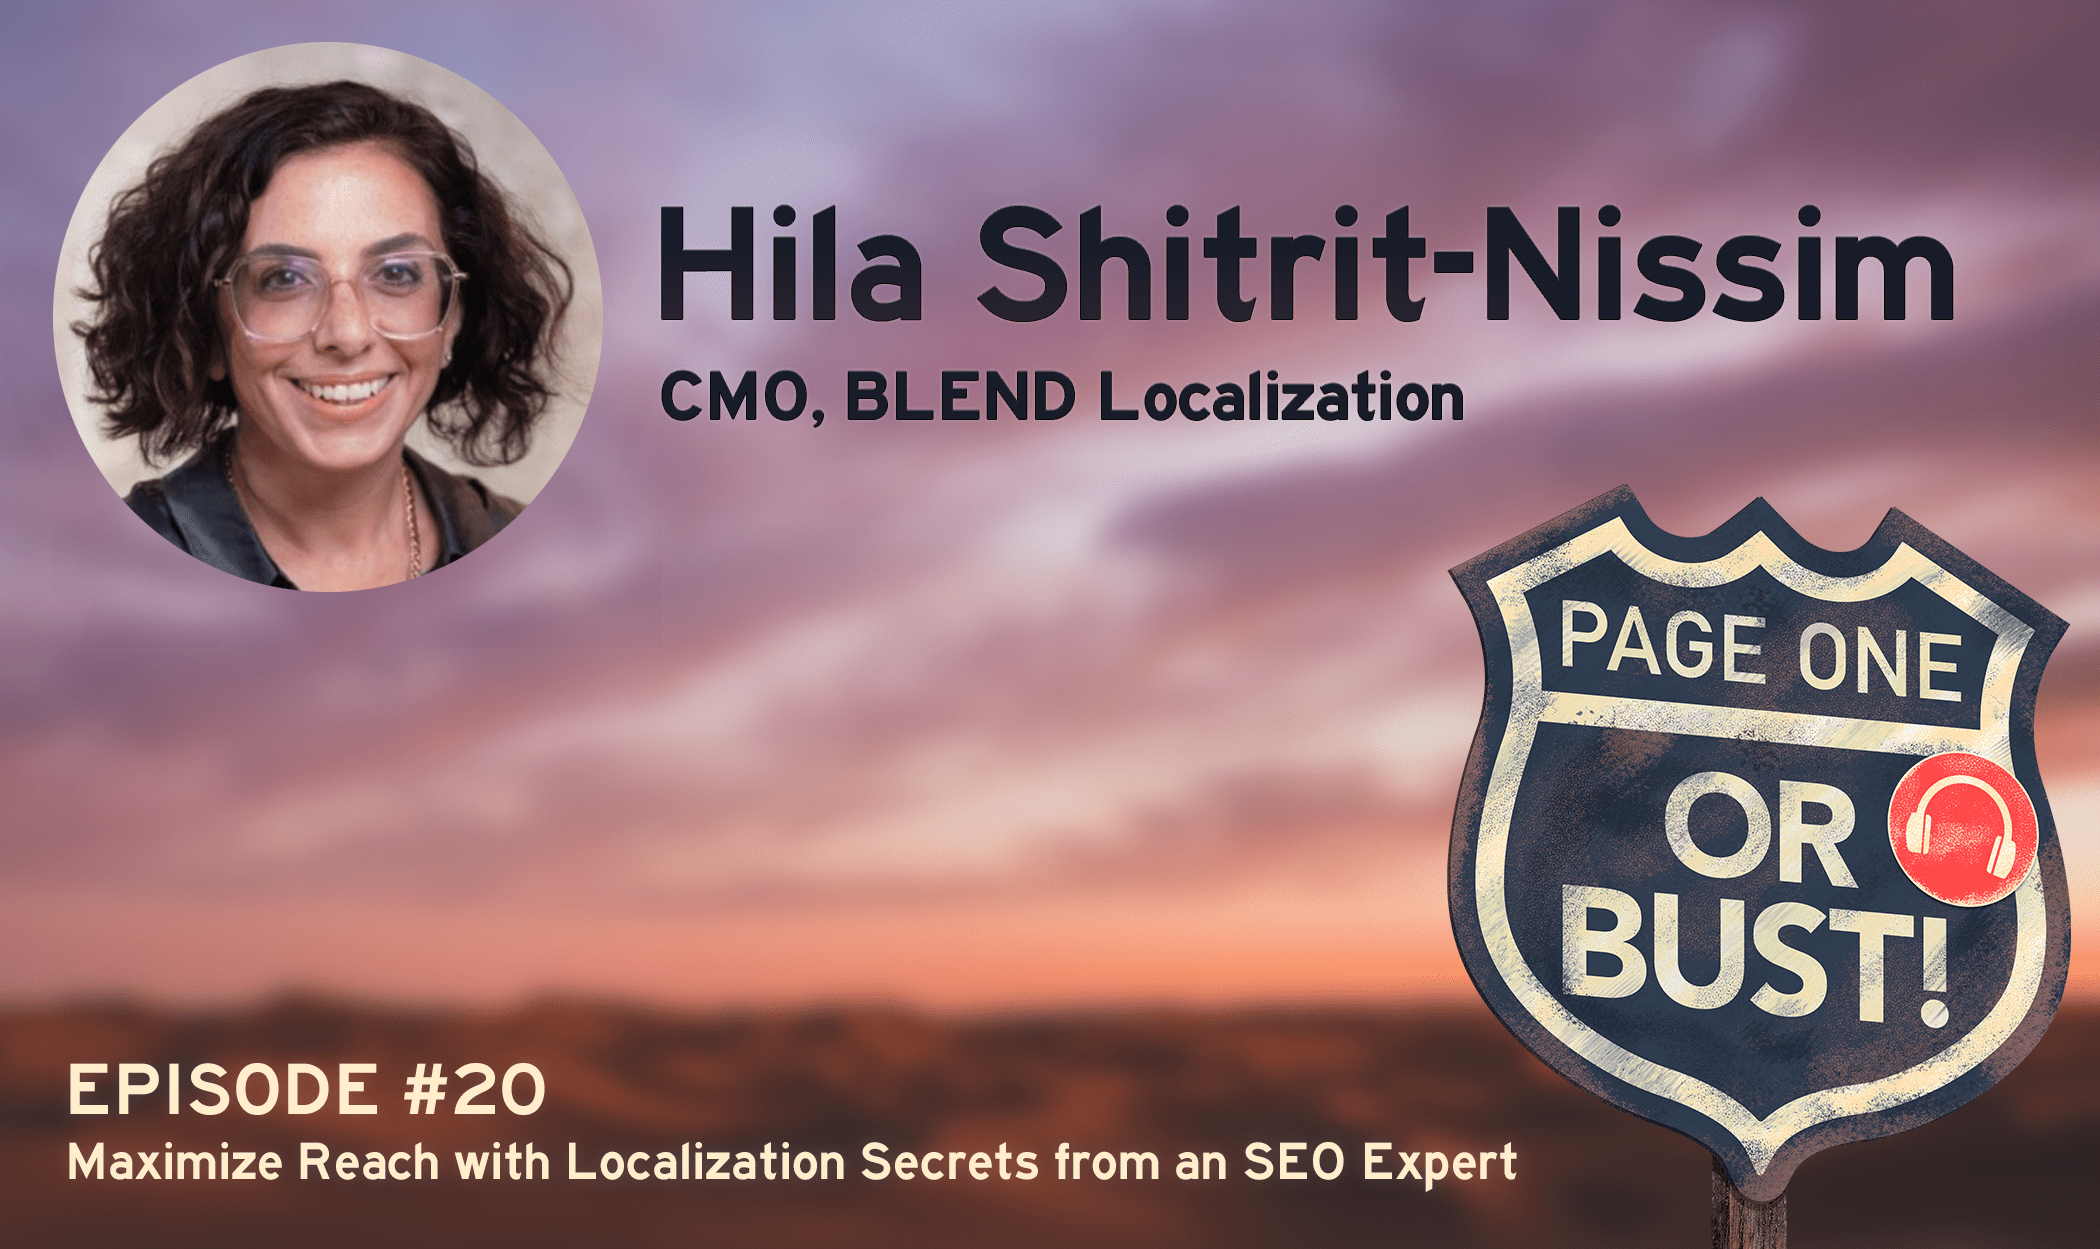 BLEND CMO Reveals SEO Localization Secrets on 'Page One' Podcast